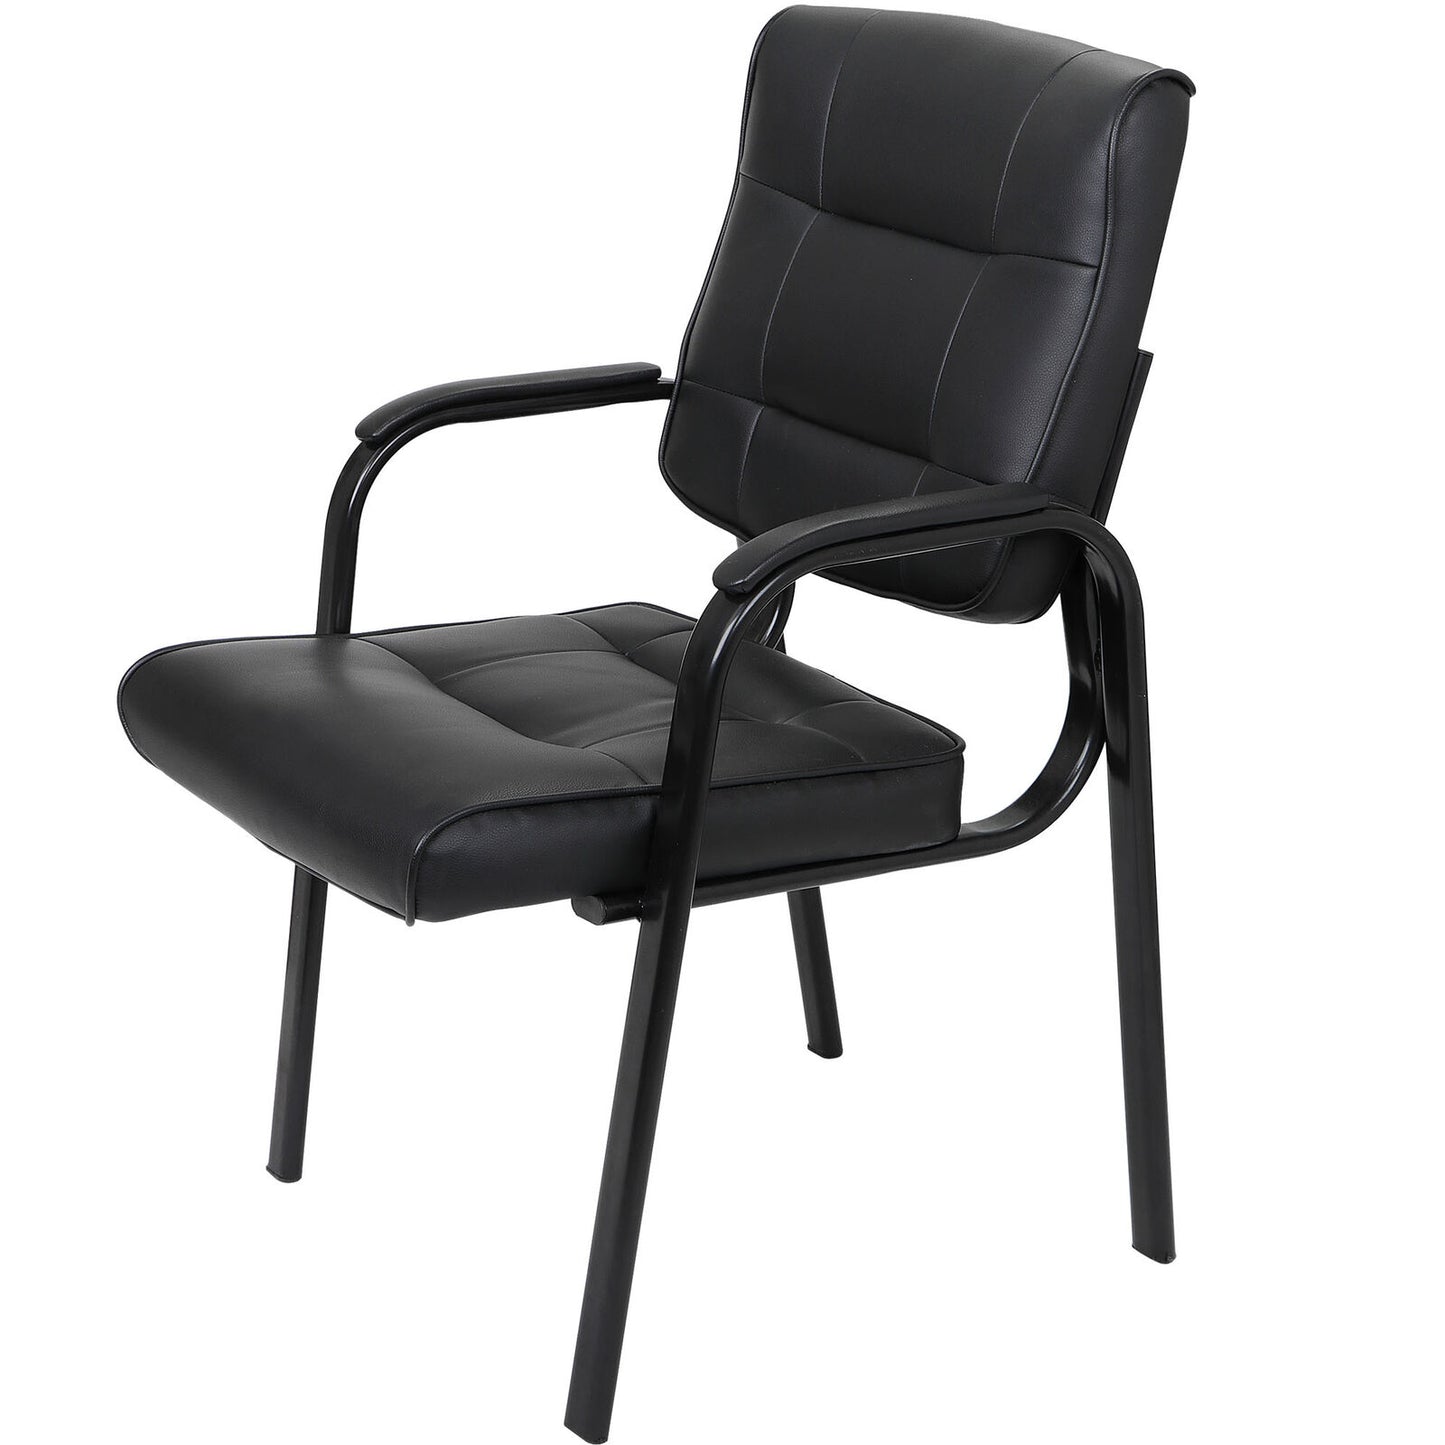 2PCS Black Leather Guest Chair Reception Waiting Room Office Desk Side Chairs